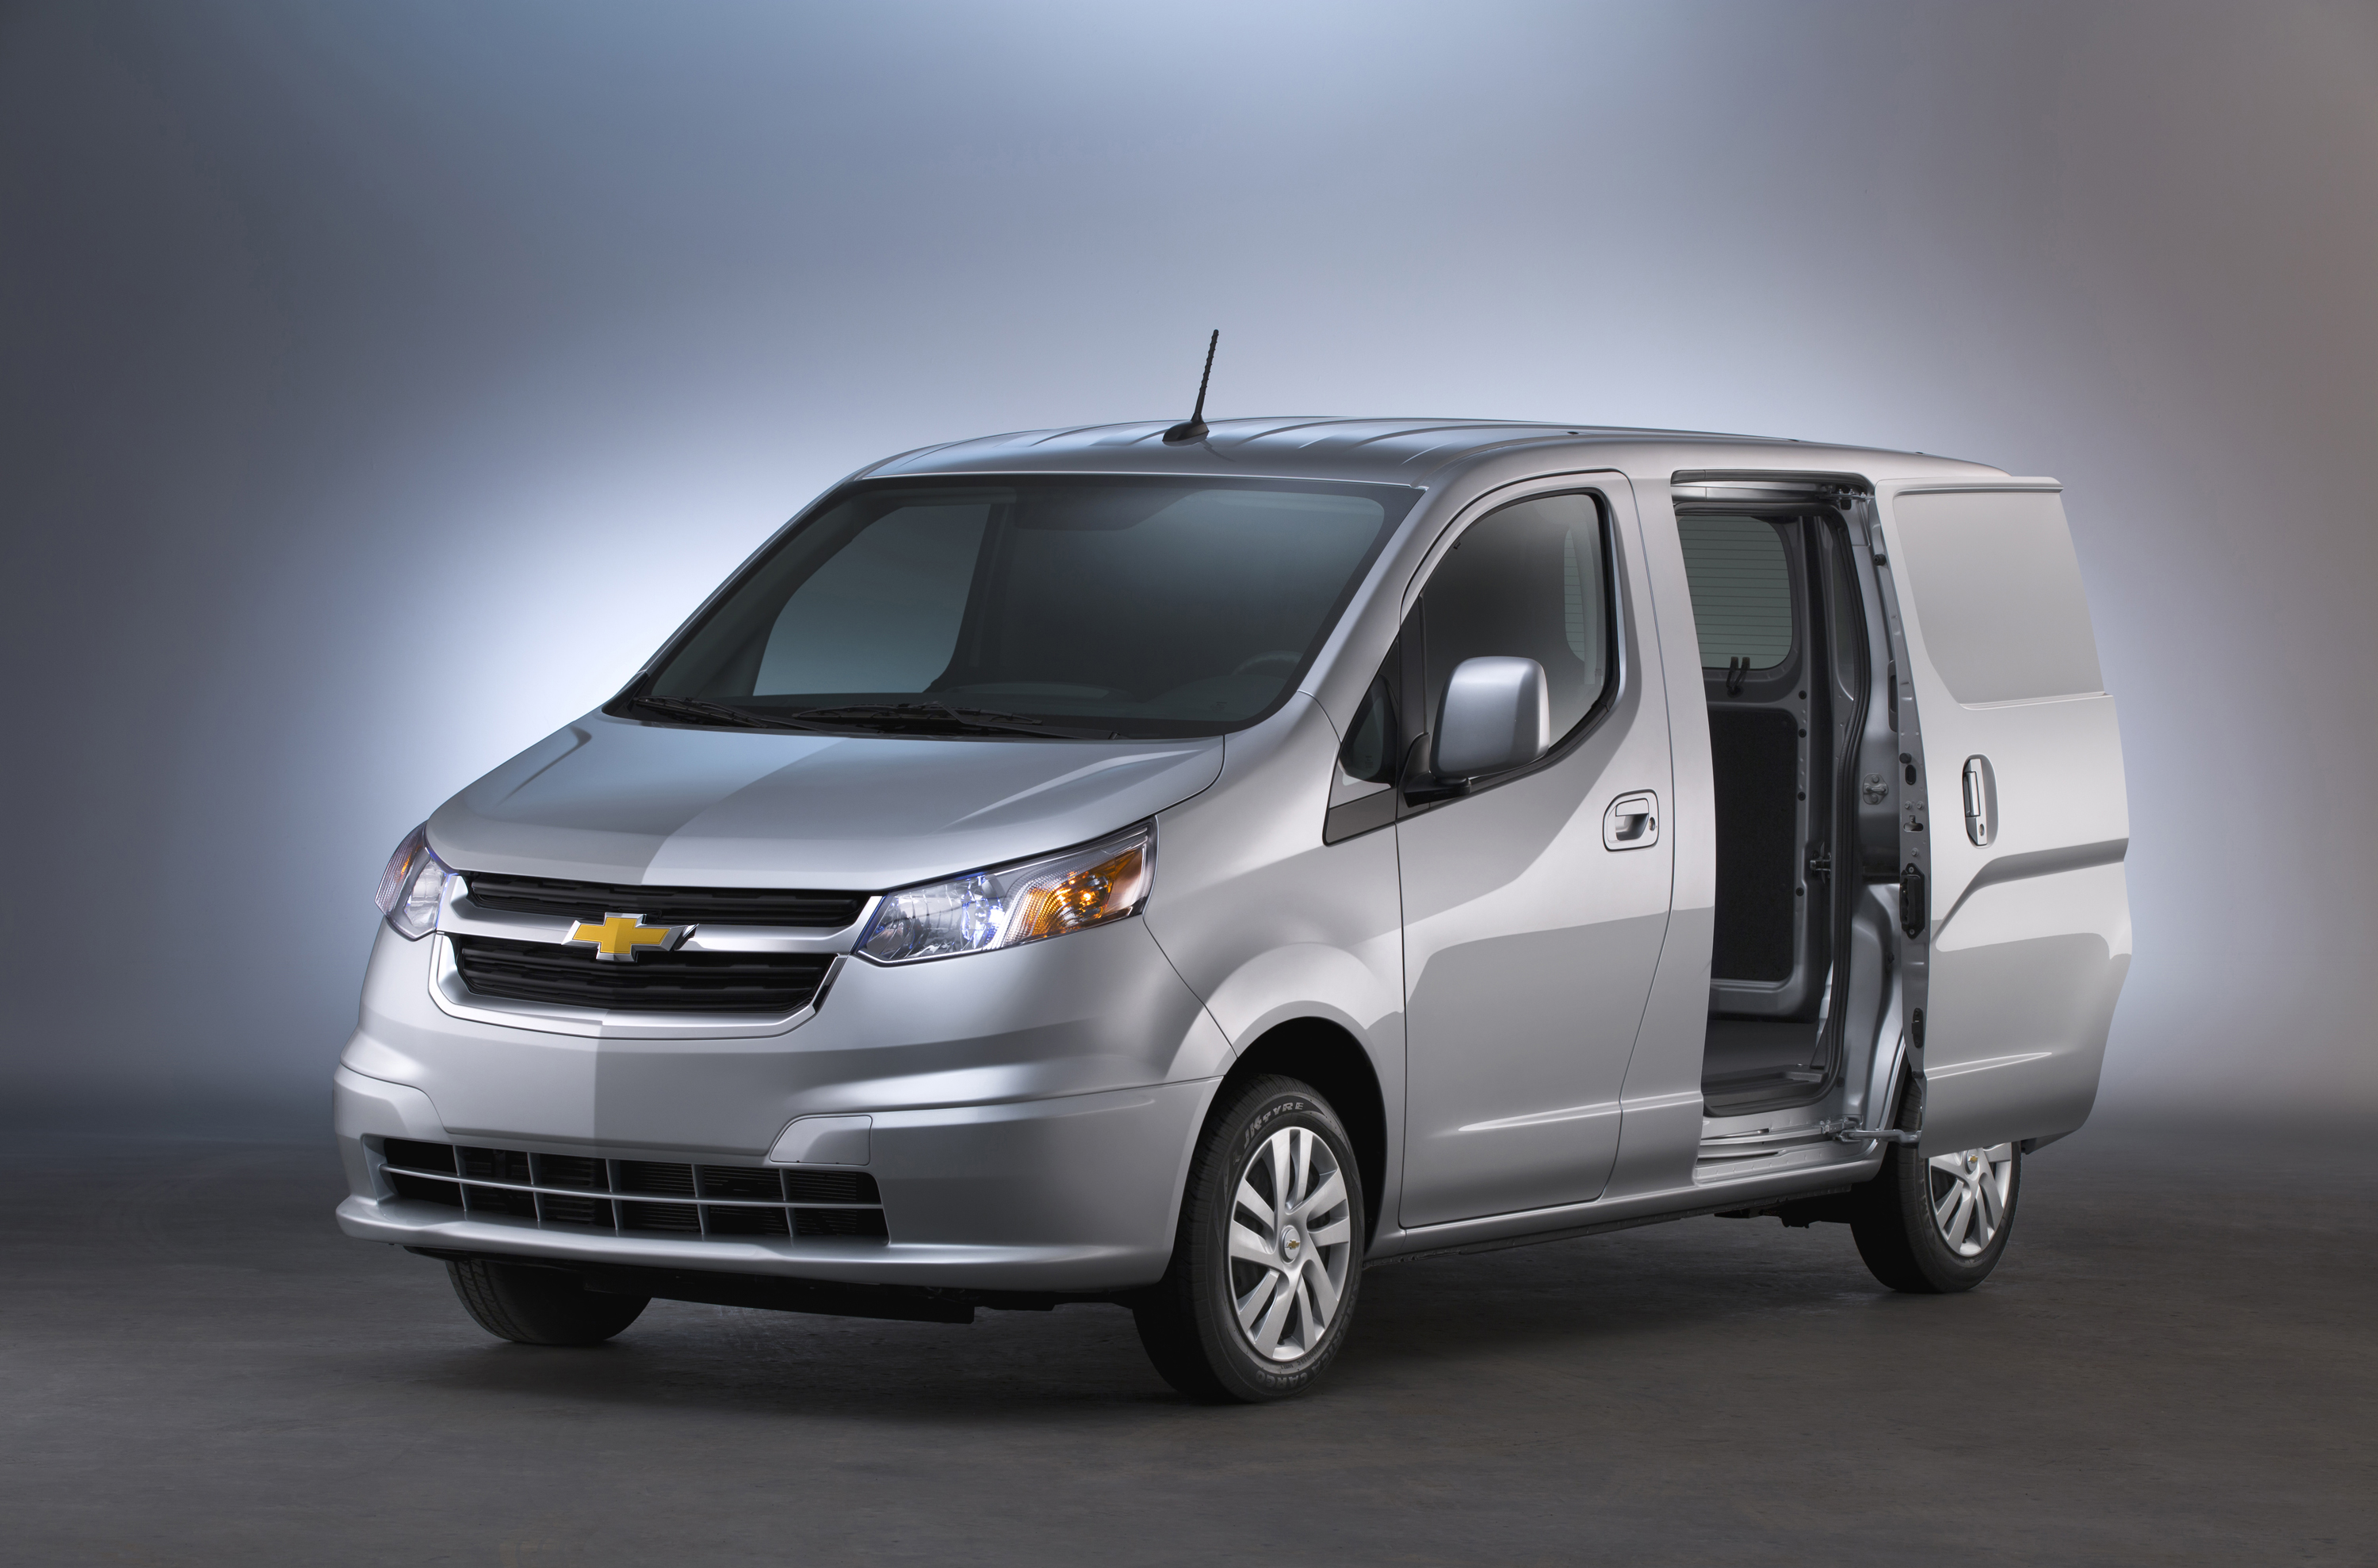 2015 Chevrolet City Express Delivers the Goods